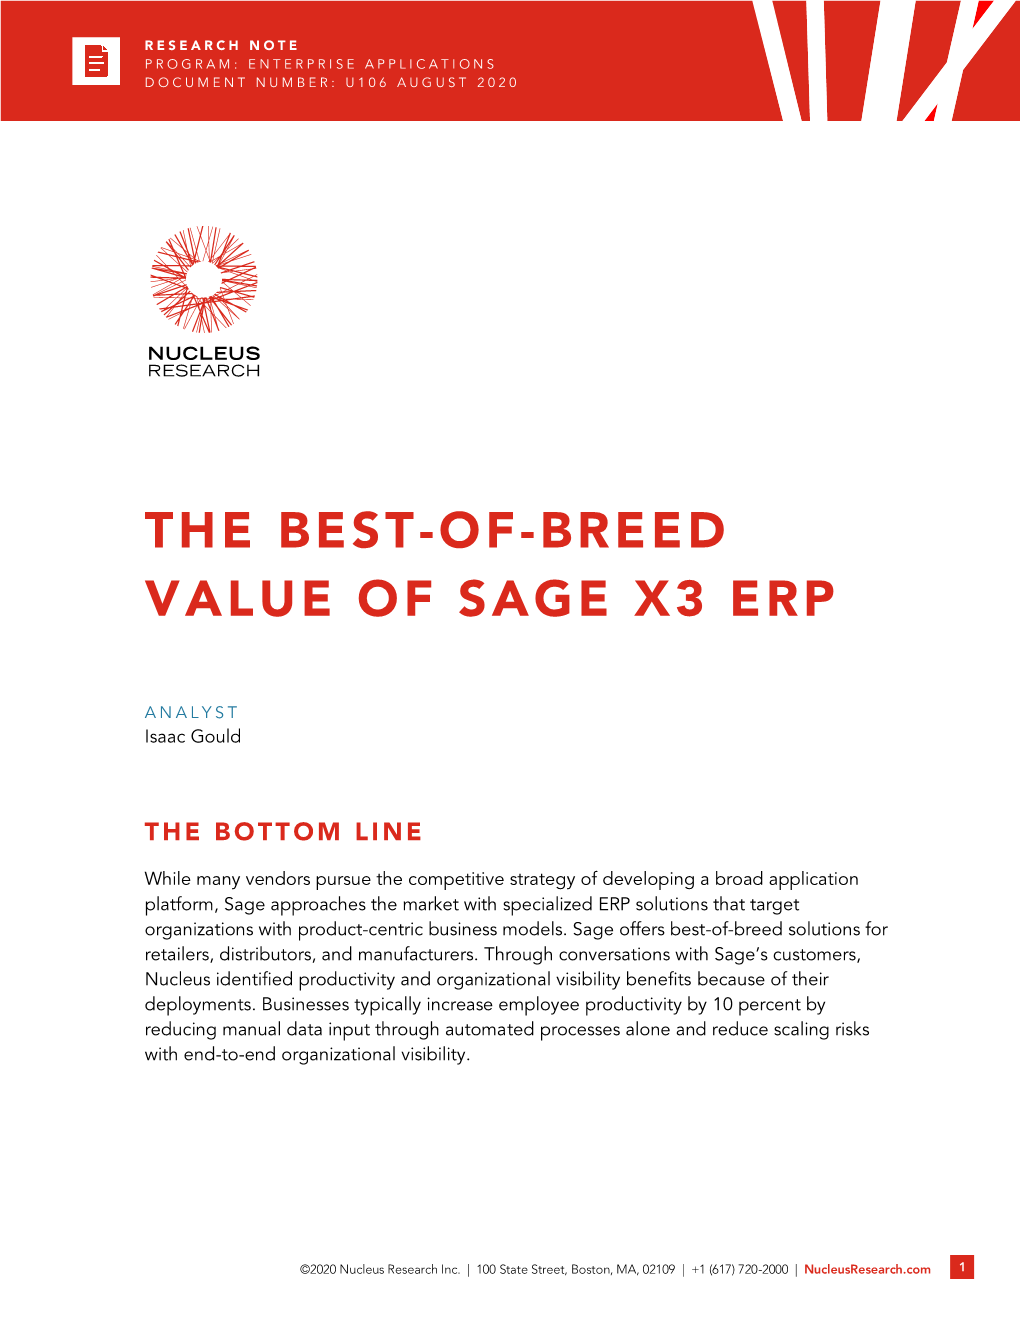 The Best-Of-Breed Value of Sage X3 Erp